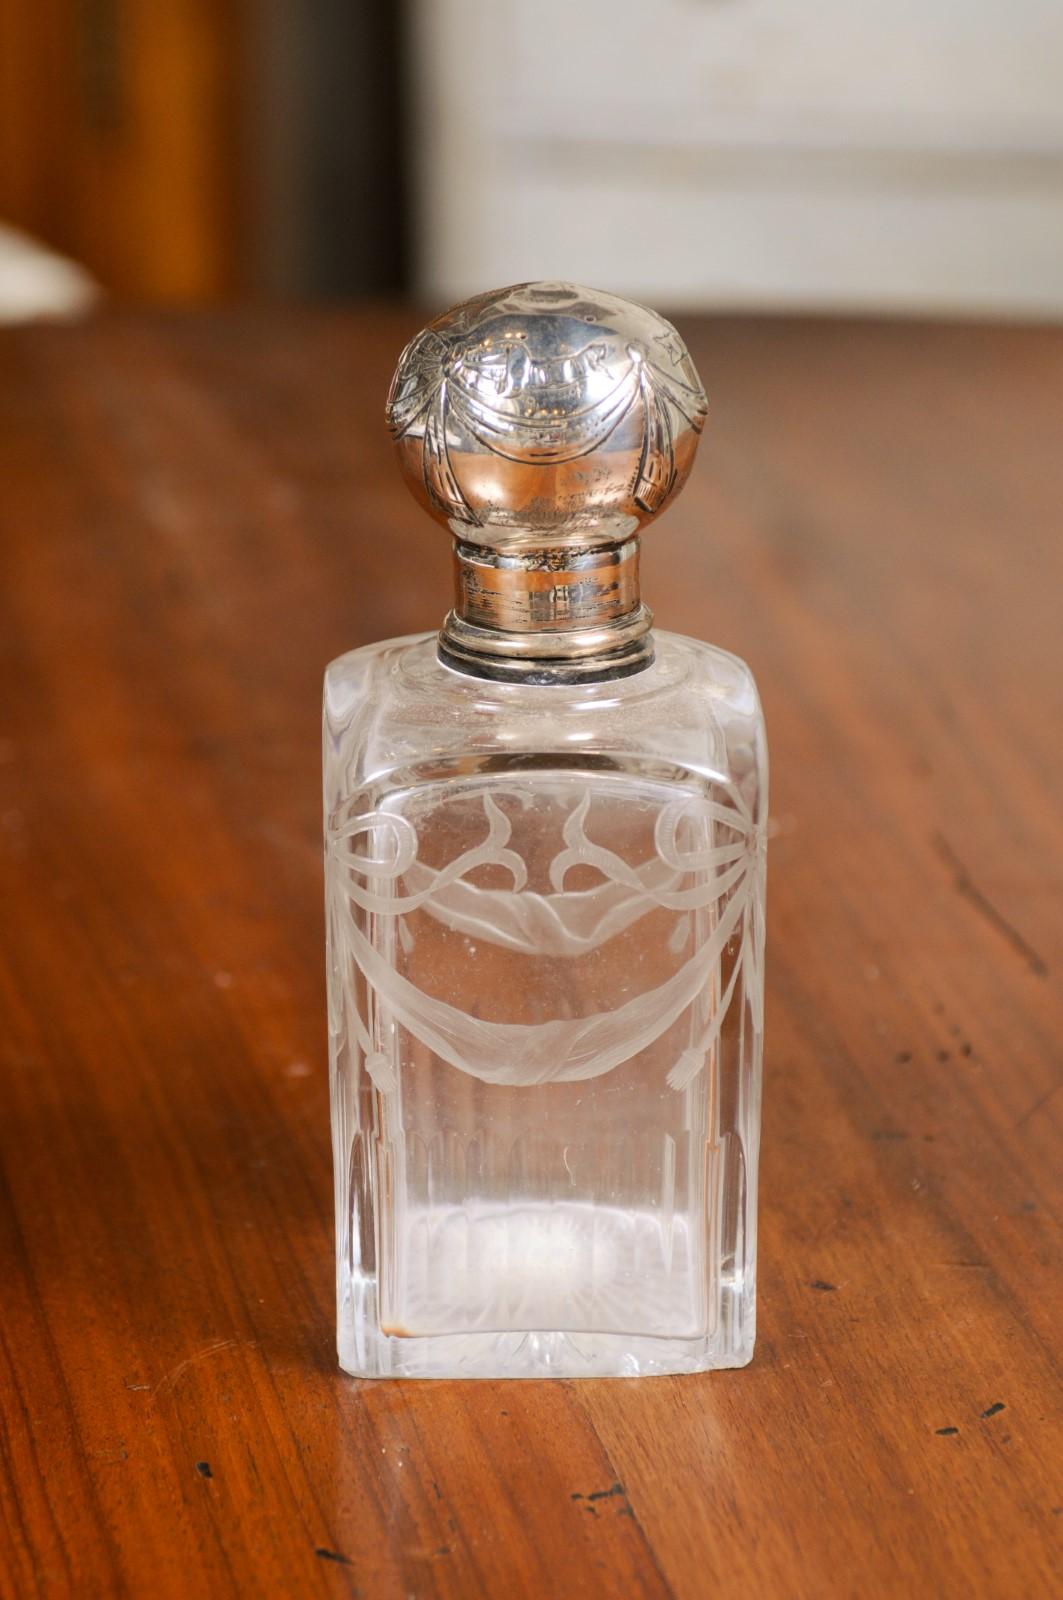 An English Victorian period glass vanity bottle from the 19th century, with silver lid and etched décor. Created in England during the reign of Queen Victoria, this small vanity bottle features a square-shaped glass body adorned with etched